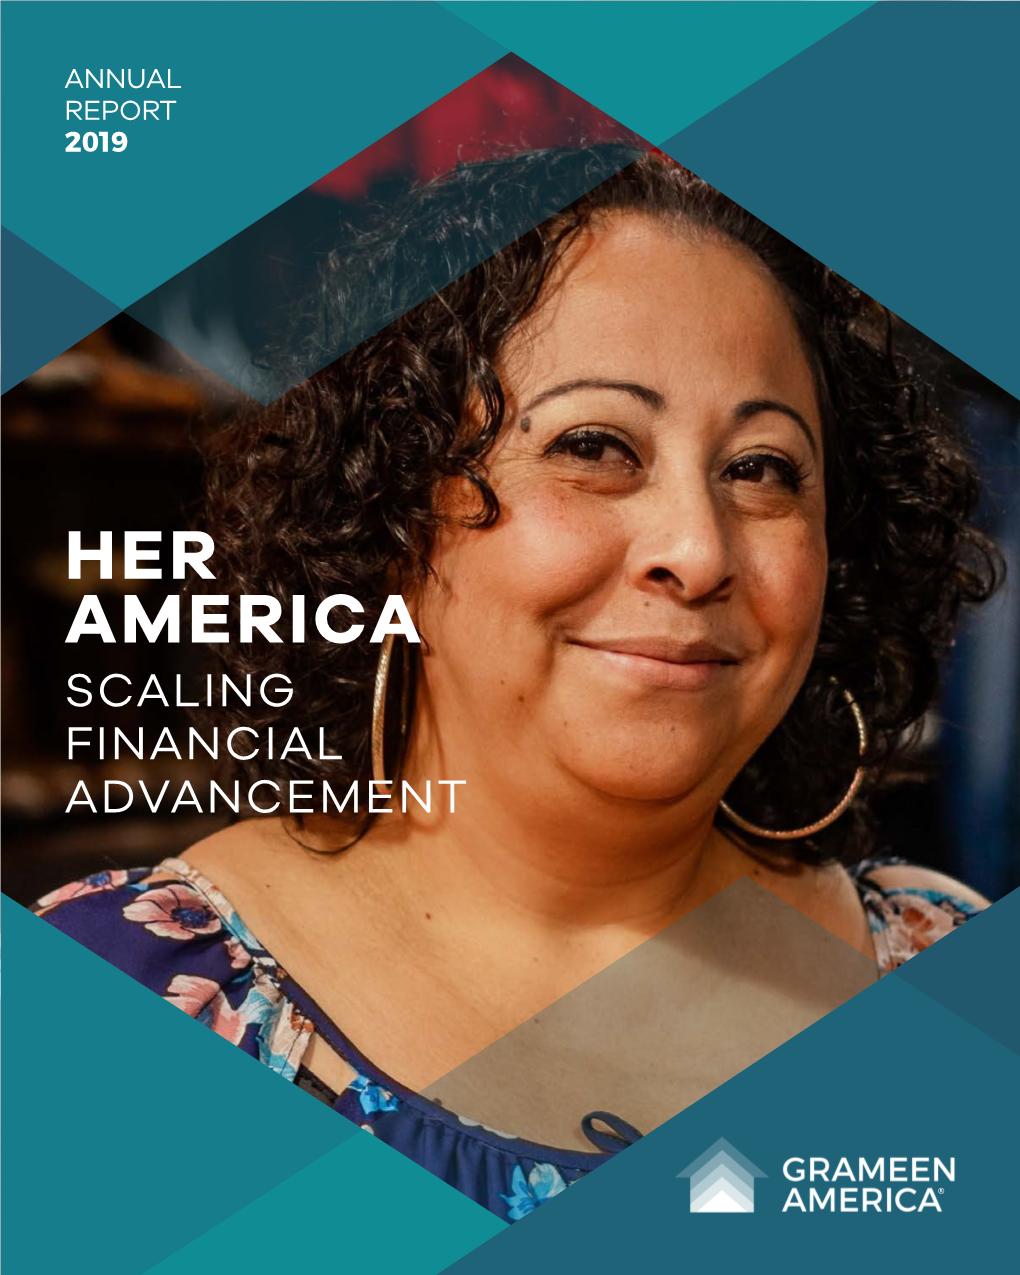 Her America Scaling Financial Advancement